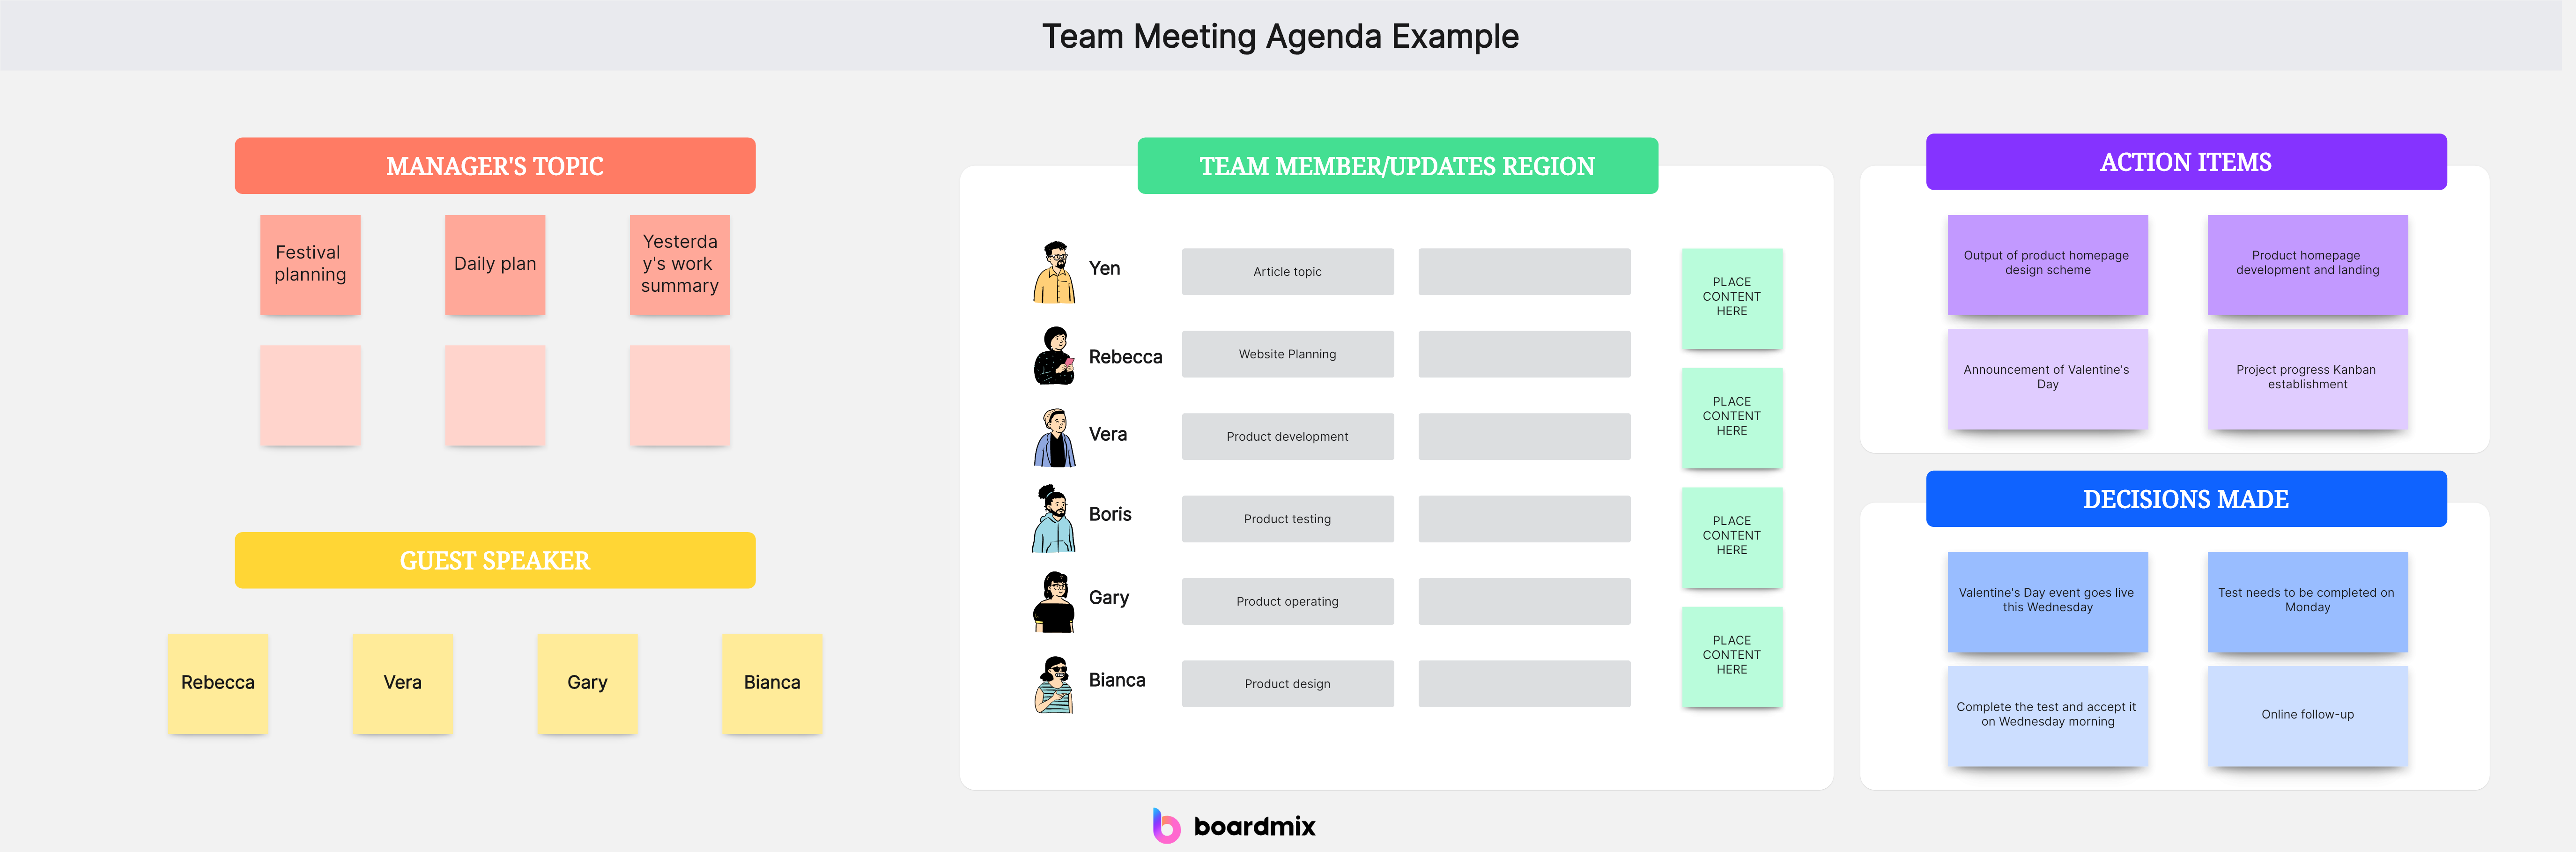 Meeting Agenda Examples: Templates for Productive Meetings